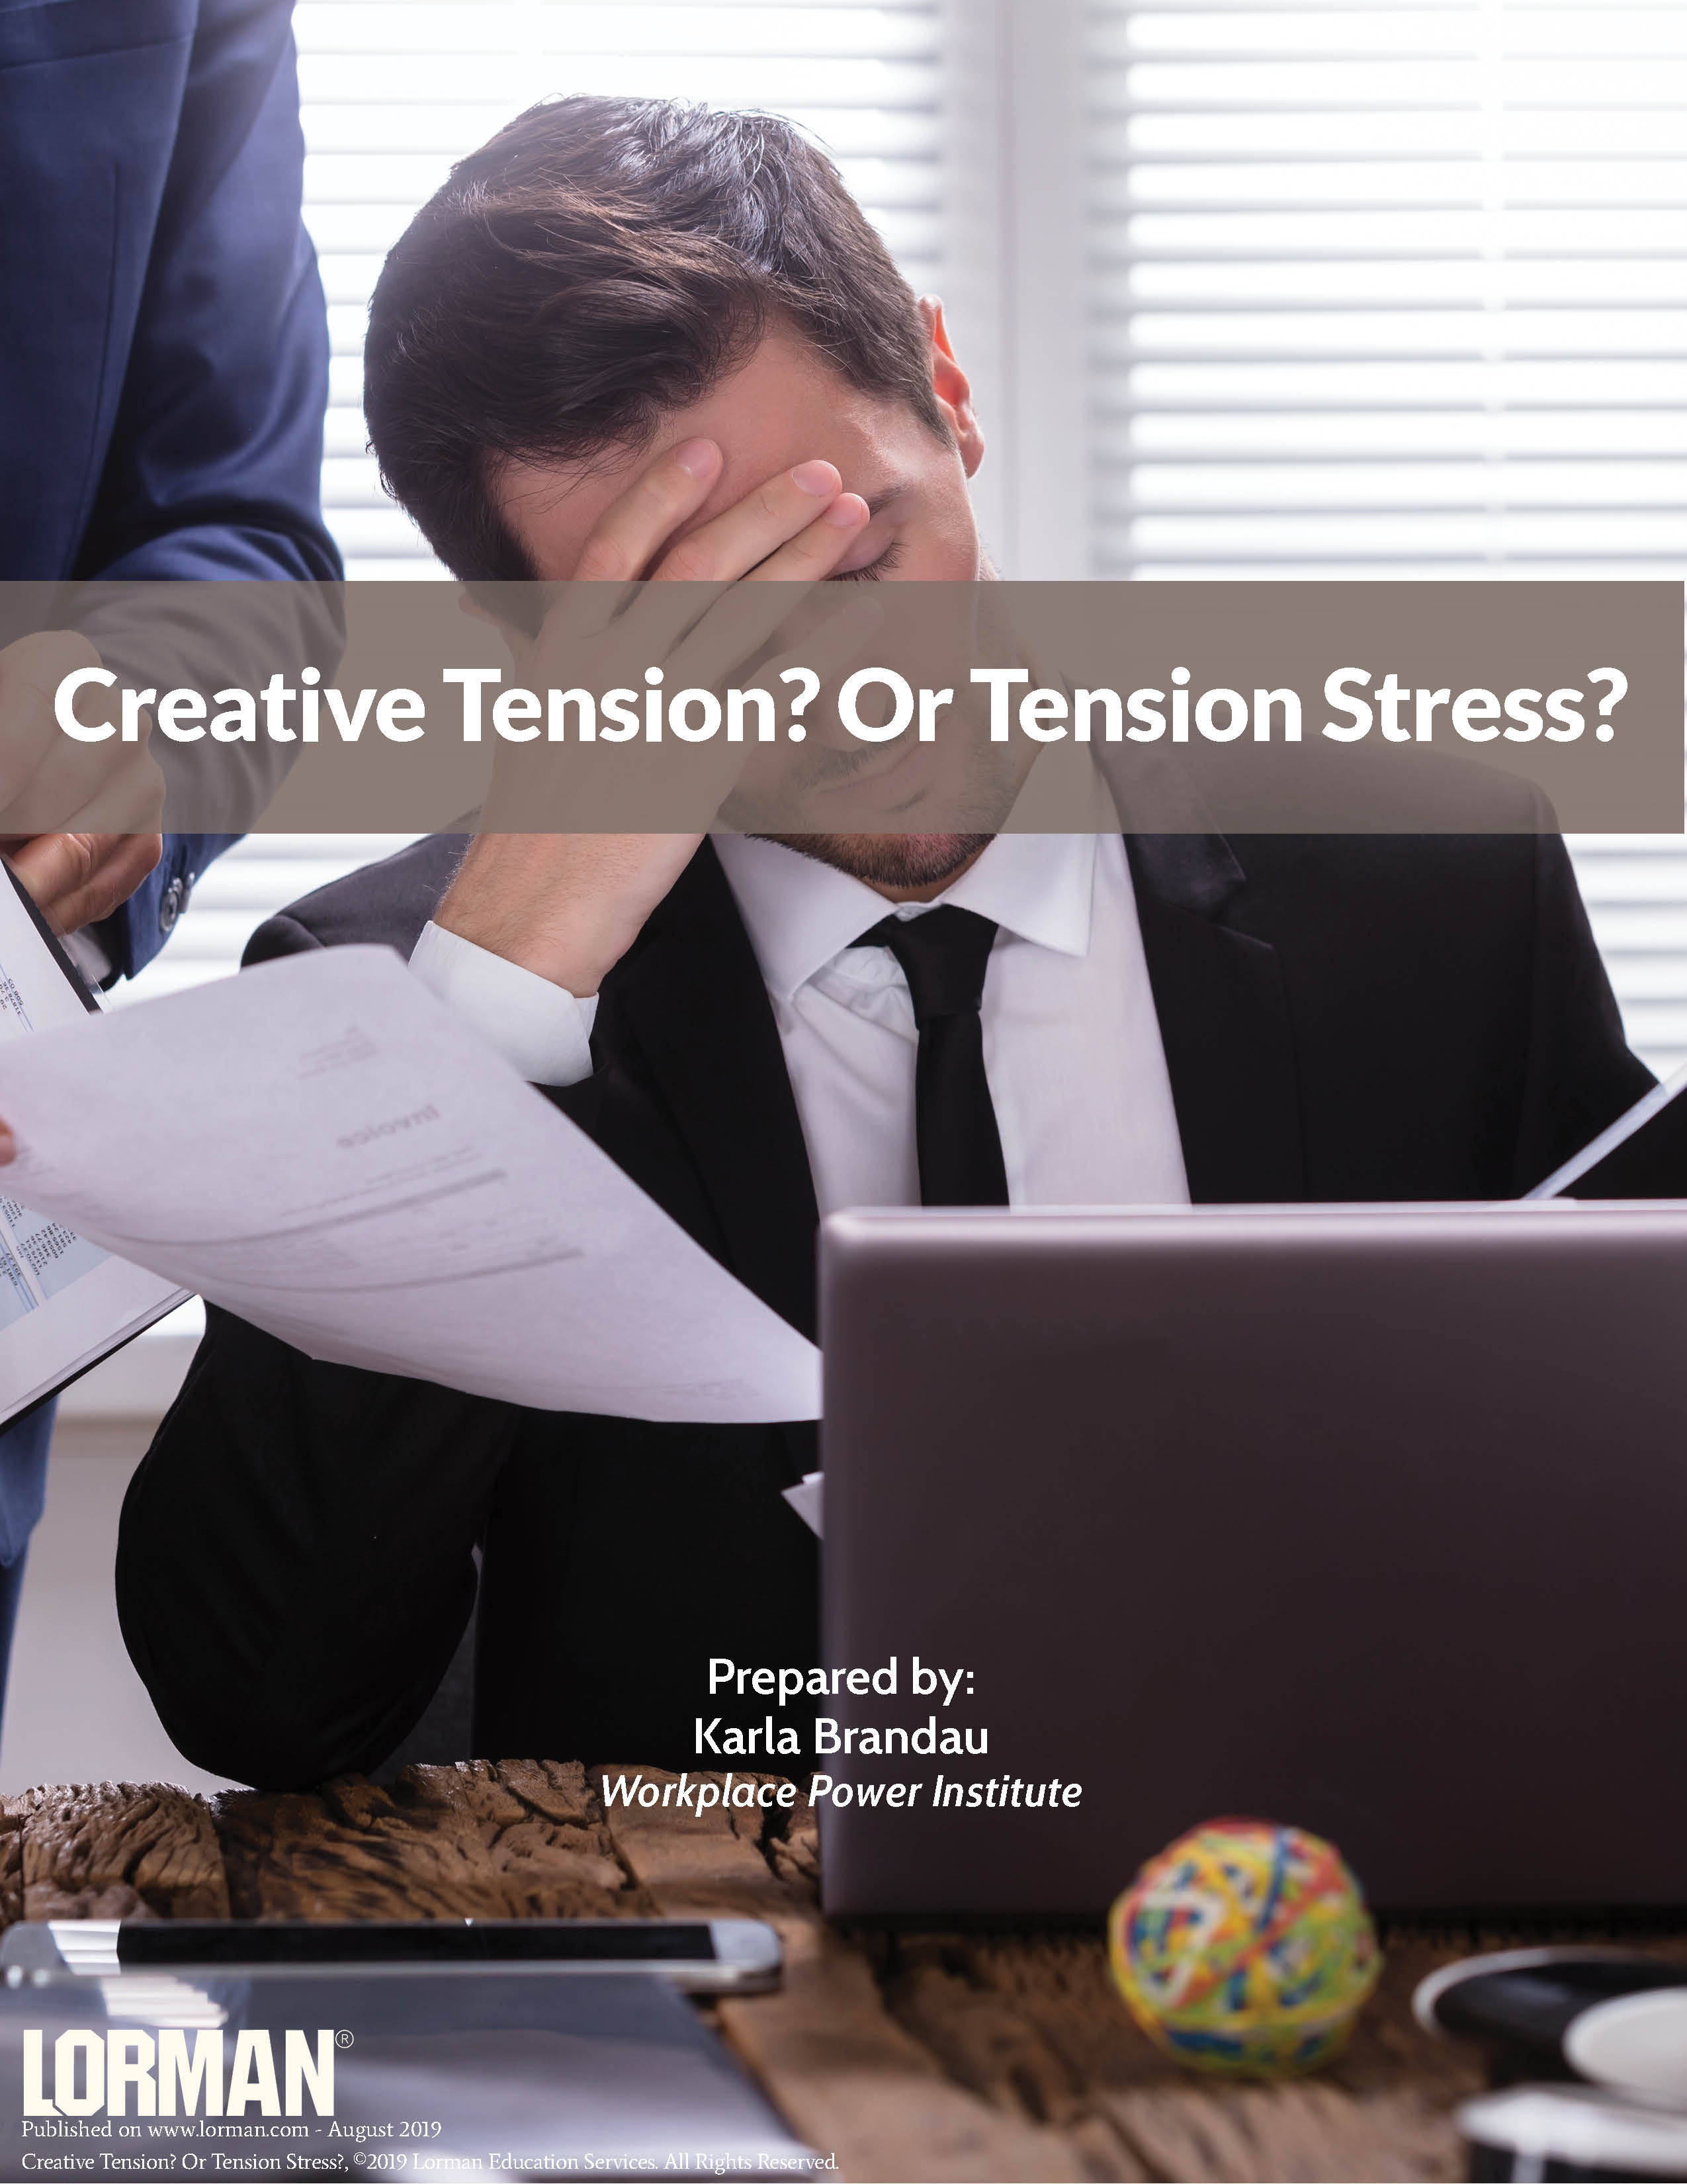 Creative Tension? Or Tension Stress?